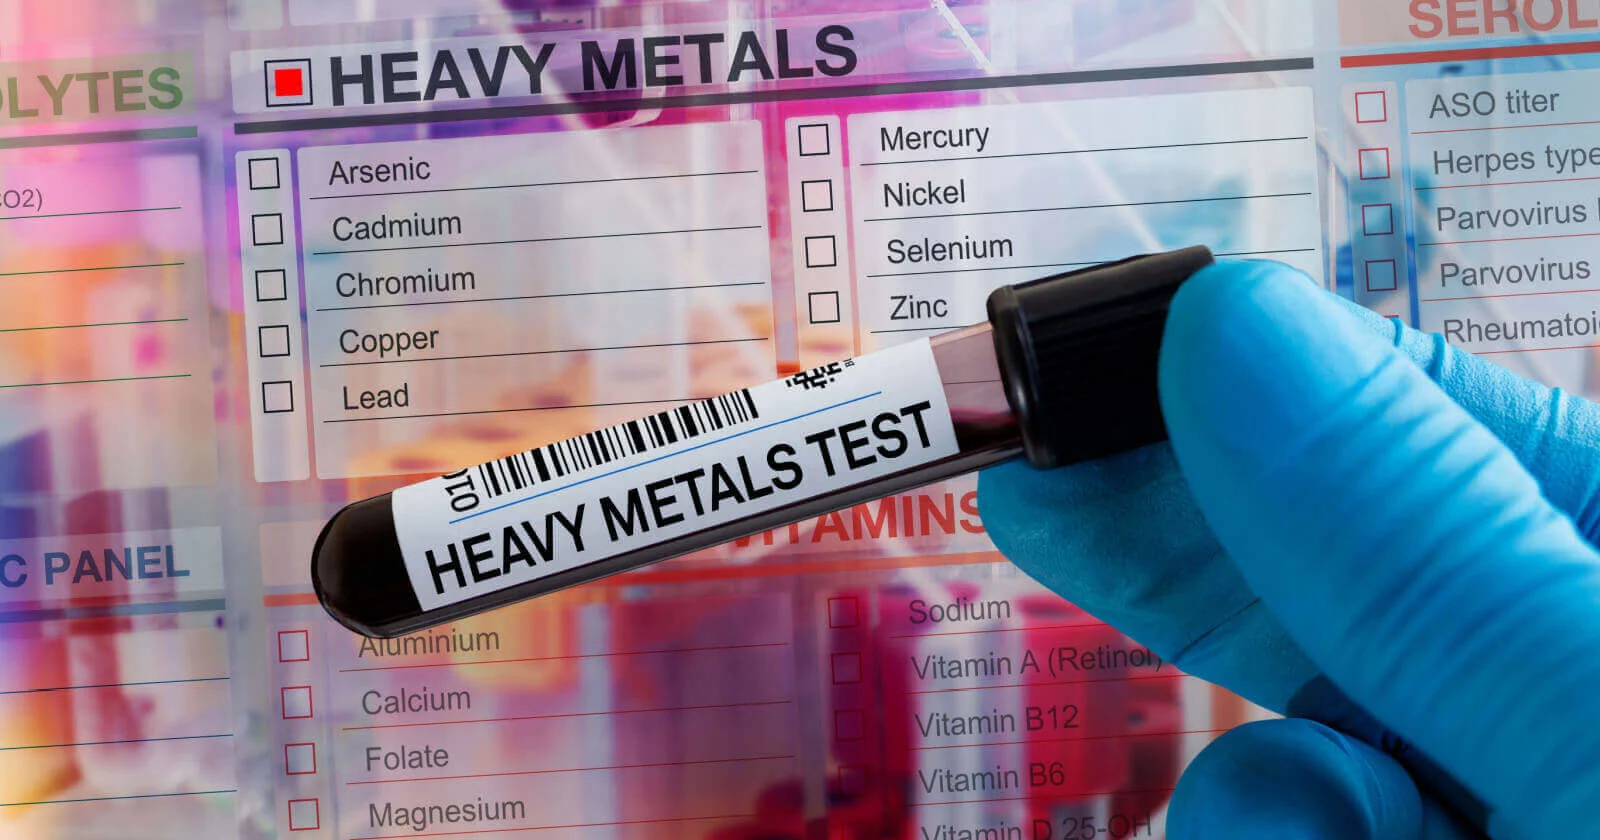 The impact of heavy metals (e.g. lead, mercury) on health and ways to reduce exposure